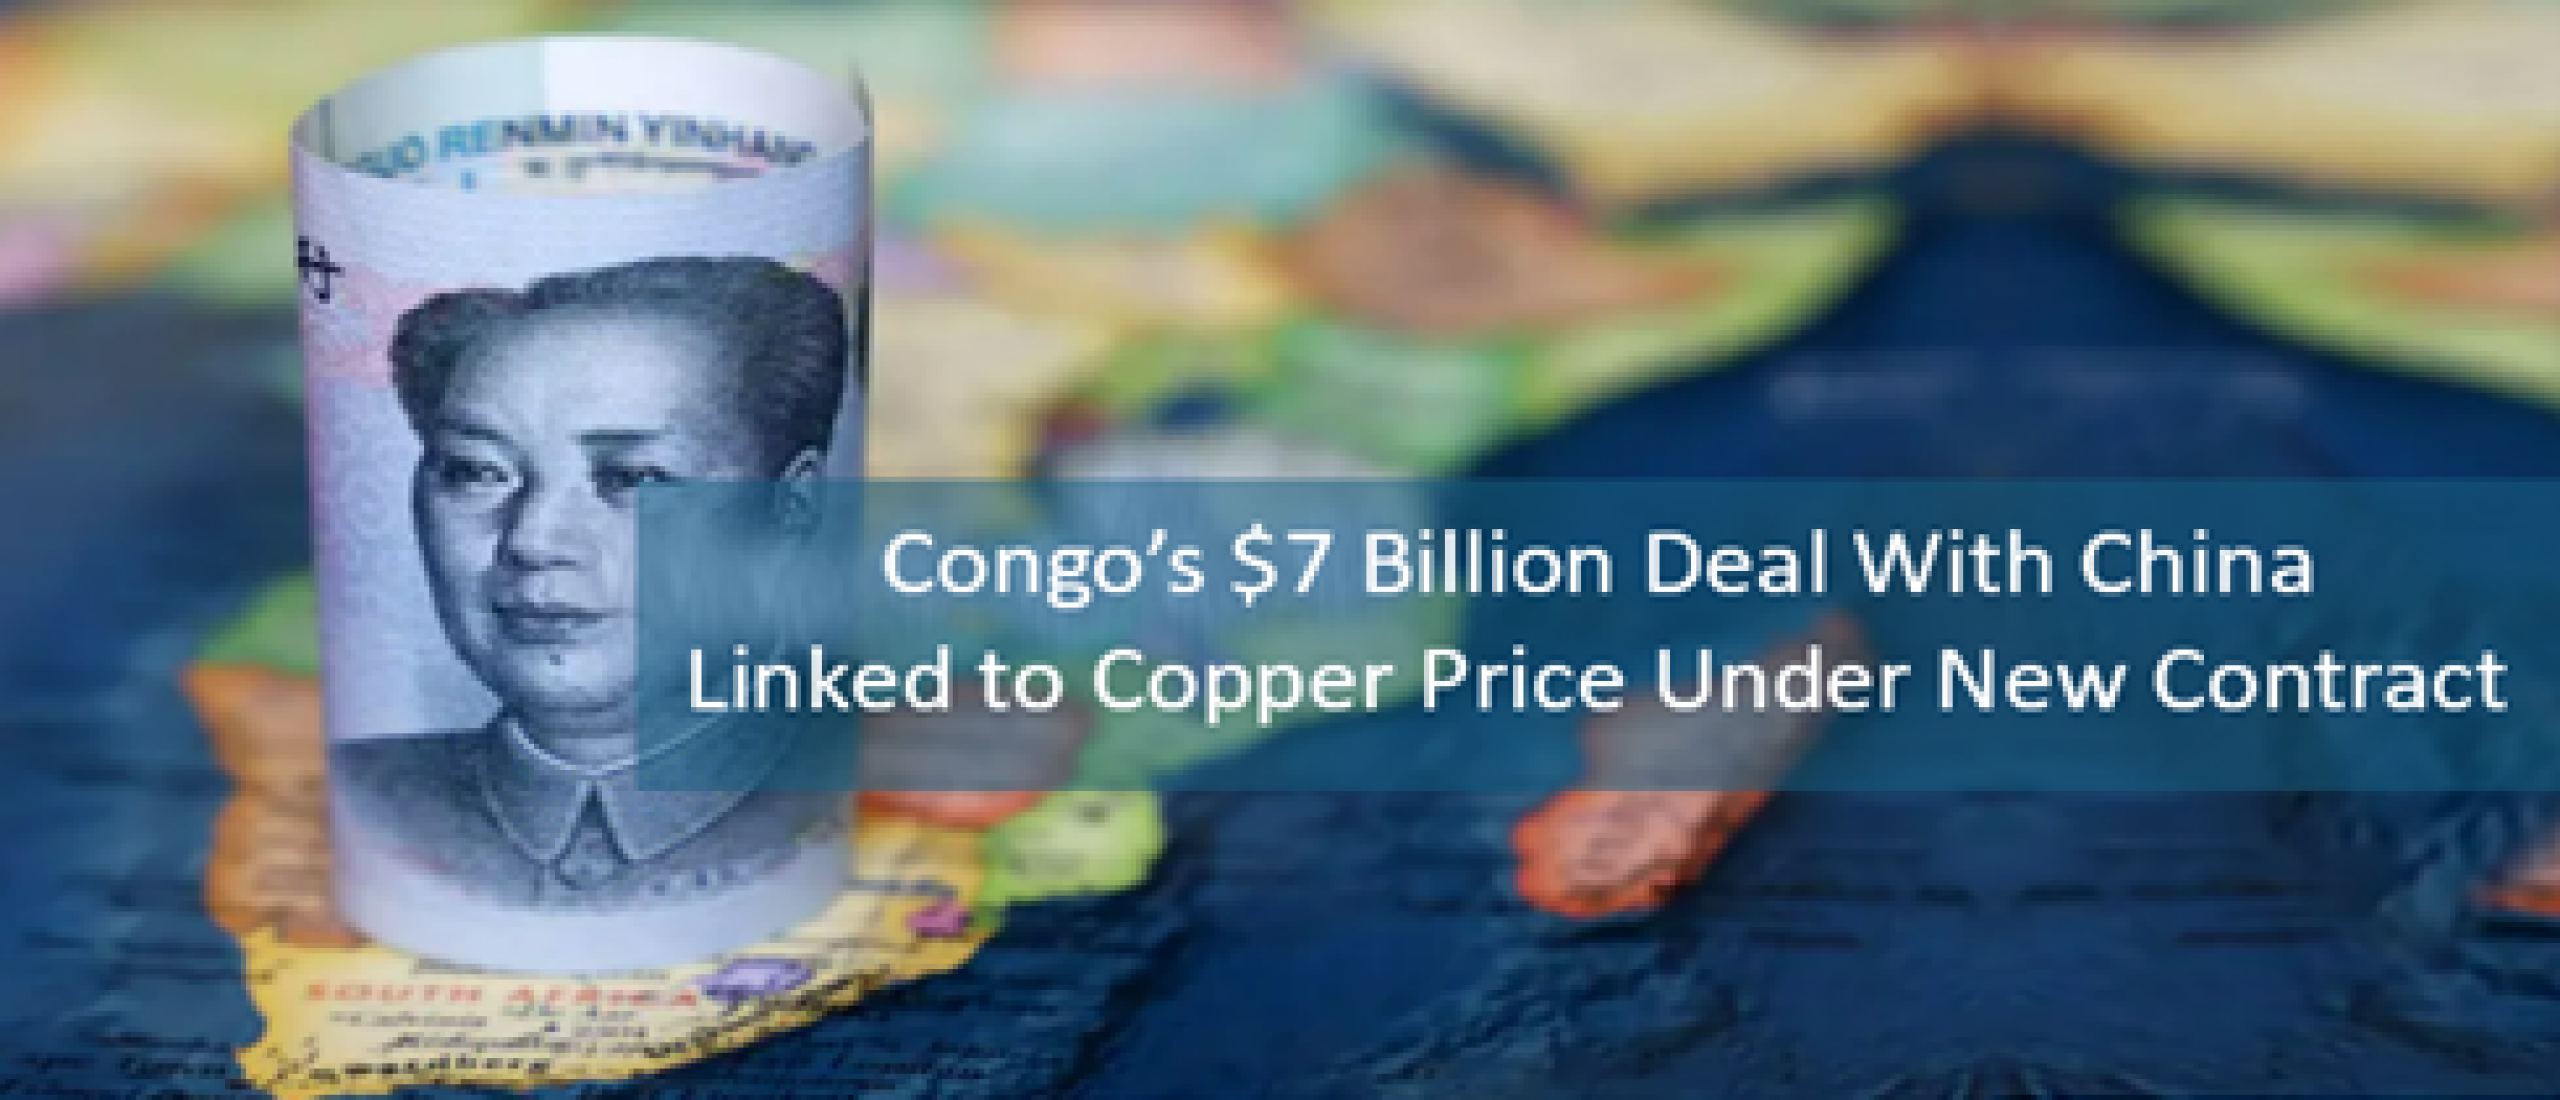 Congo’s $7 billion deal with China linked to copper price under new contract